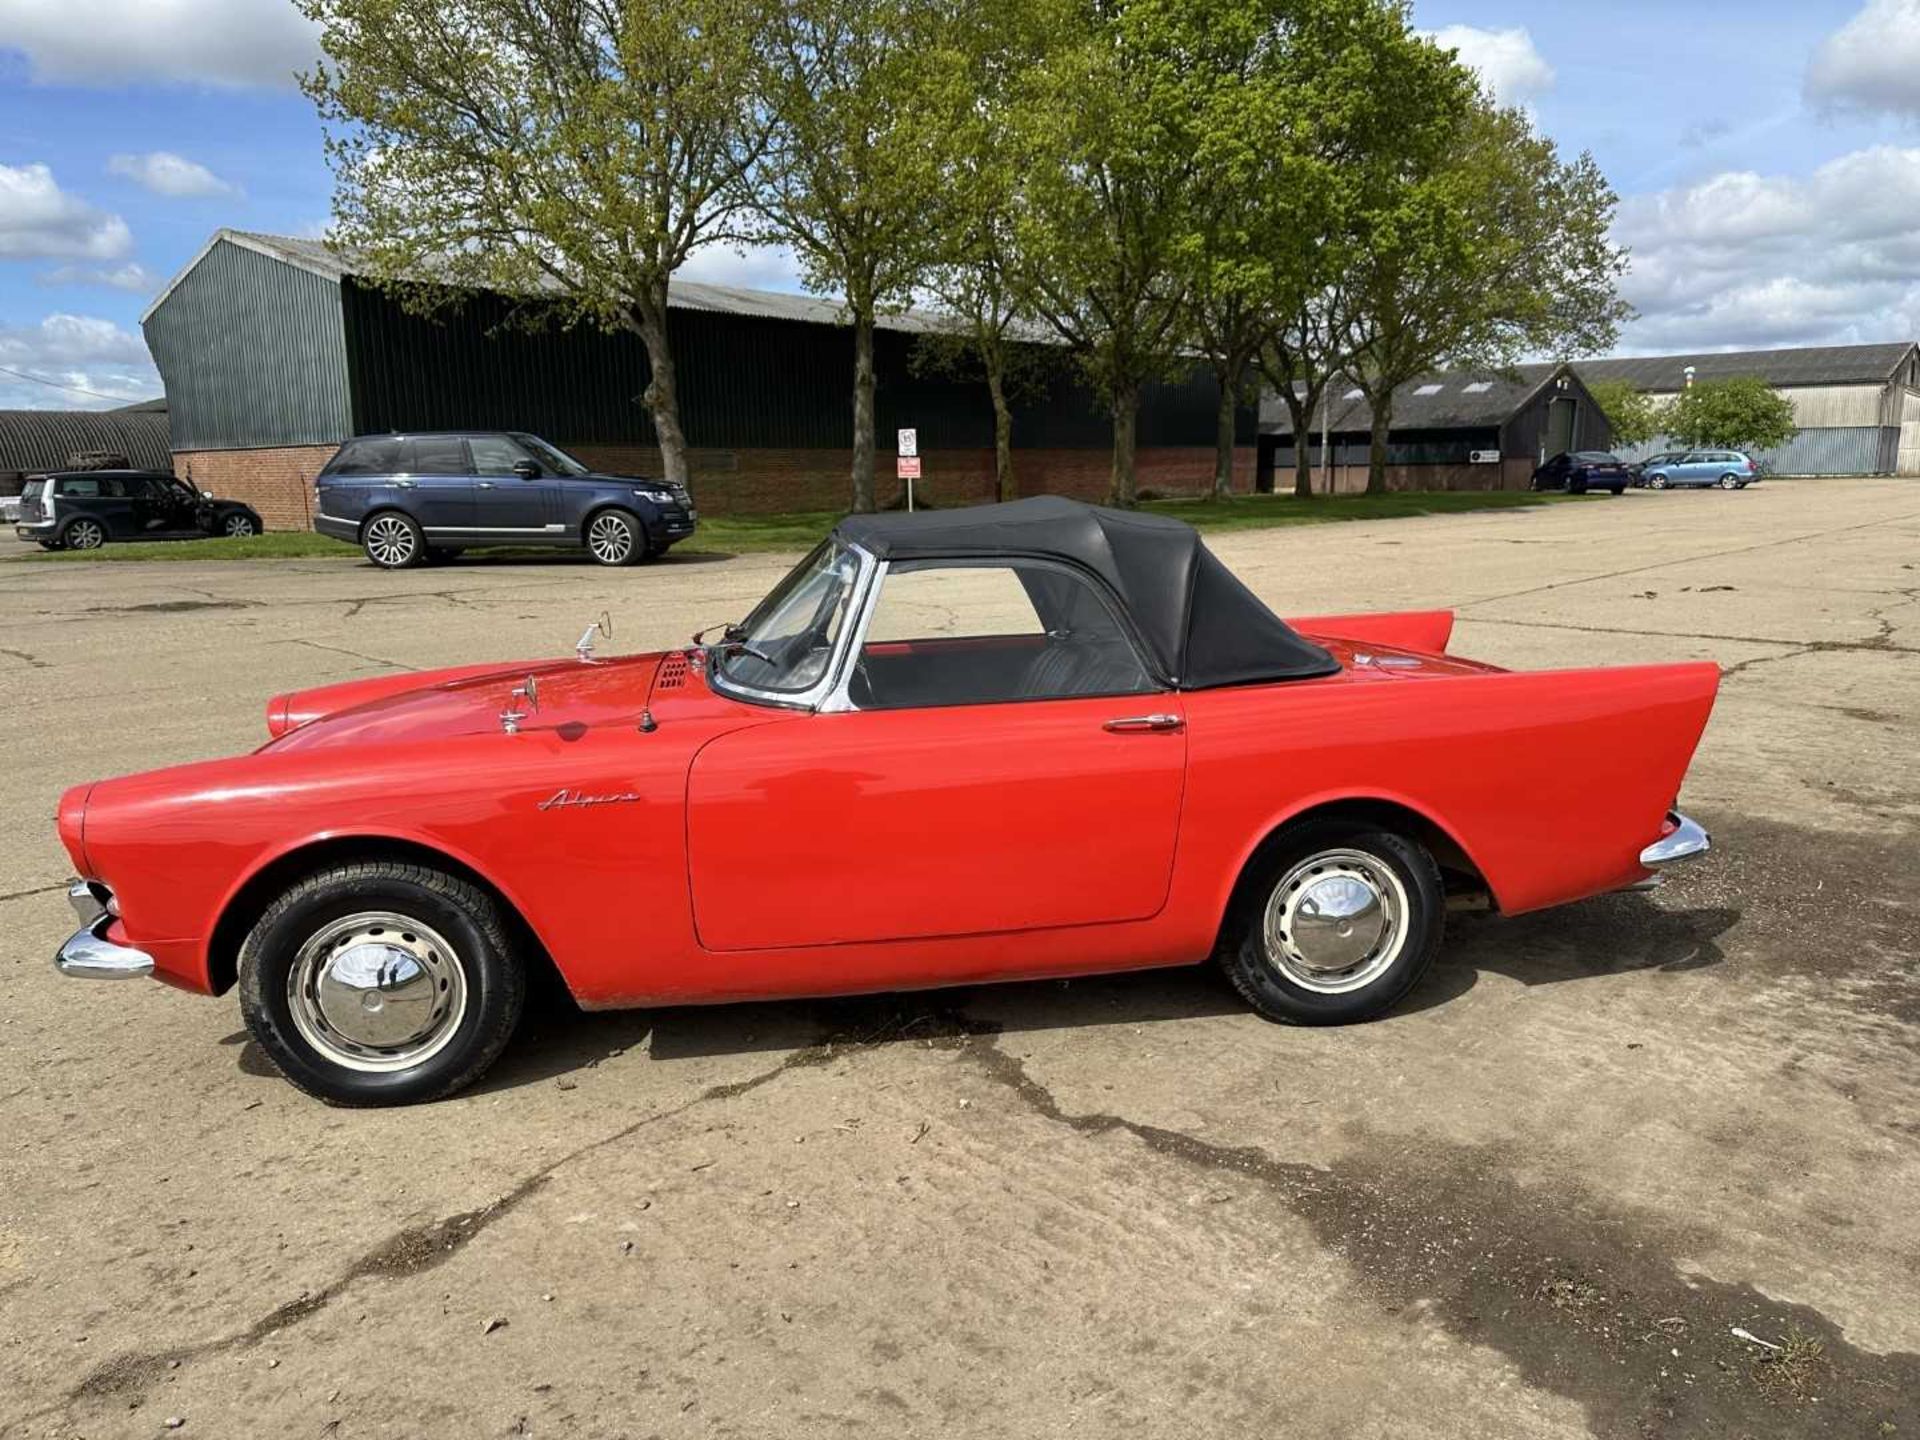 1960 Sunbeam Alpine sports convertible, 1600cc engine, manual gearbox with overdrive, reg. no. 3685 - Image 10 of 30